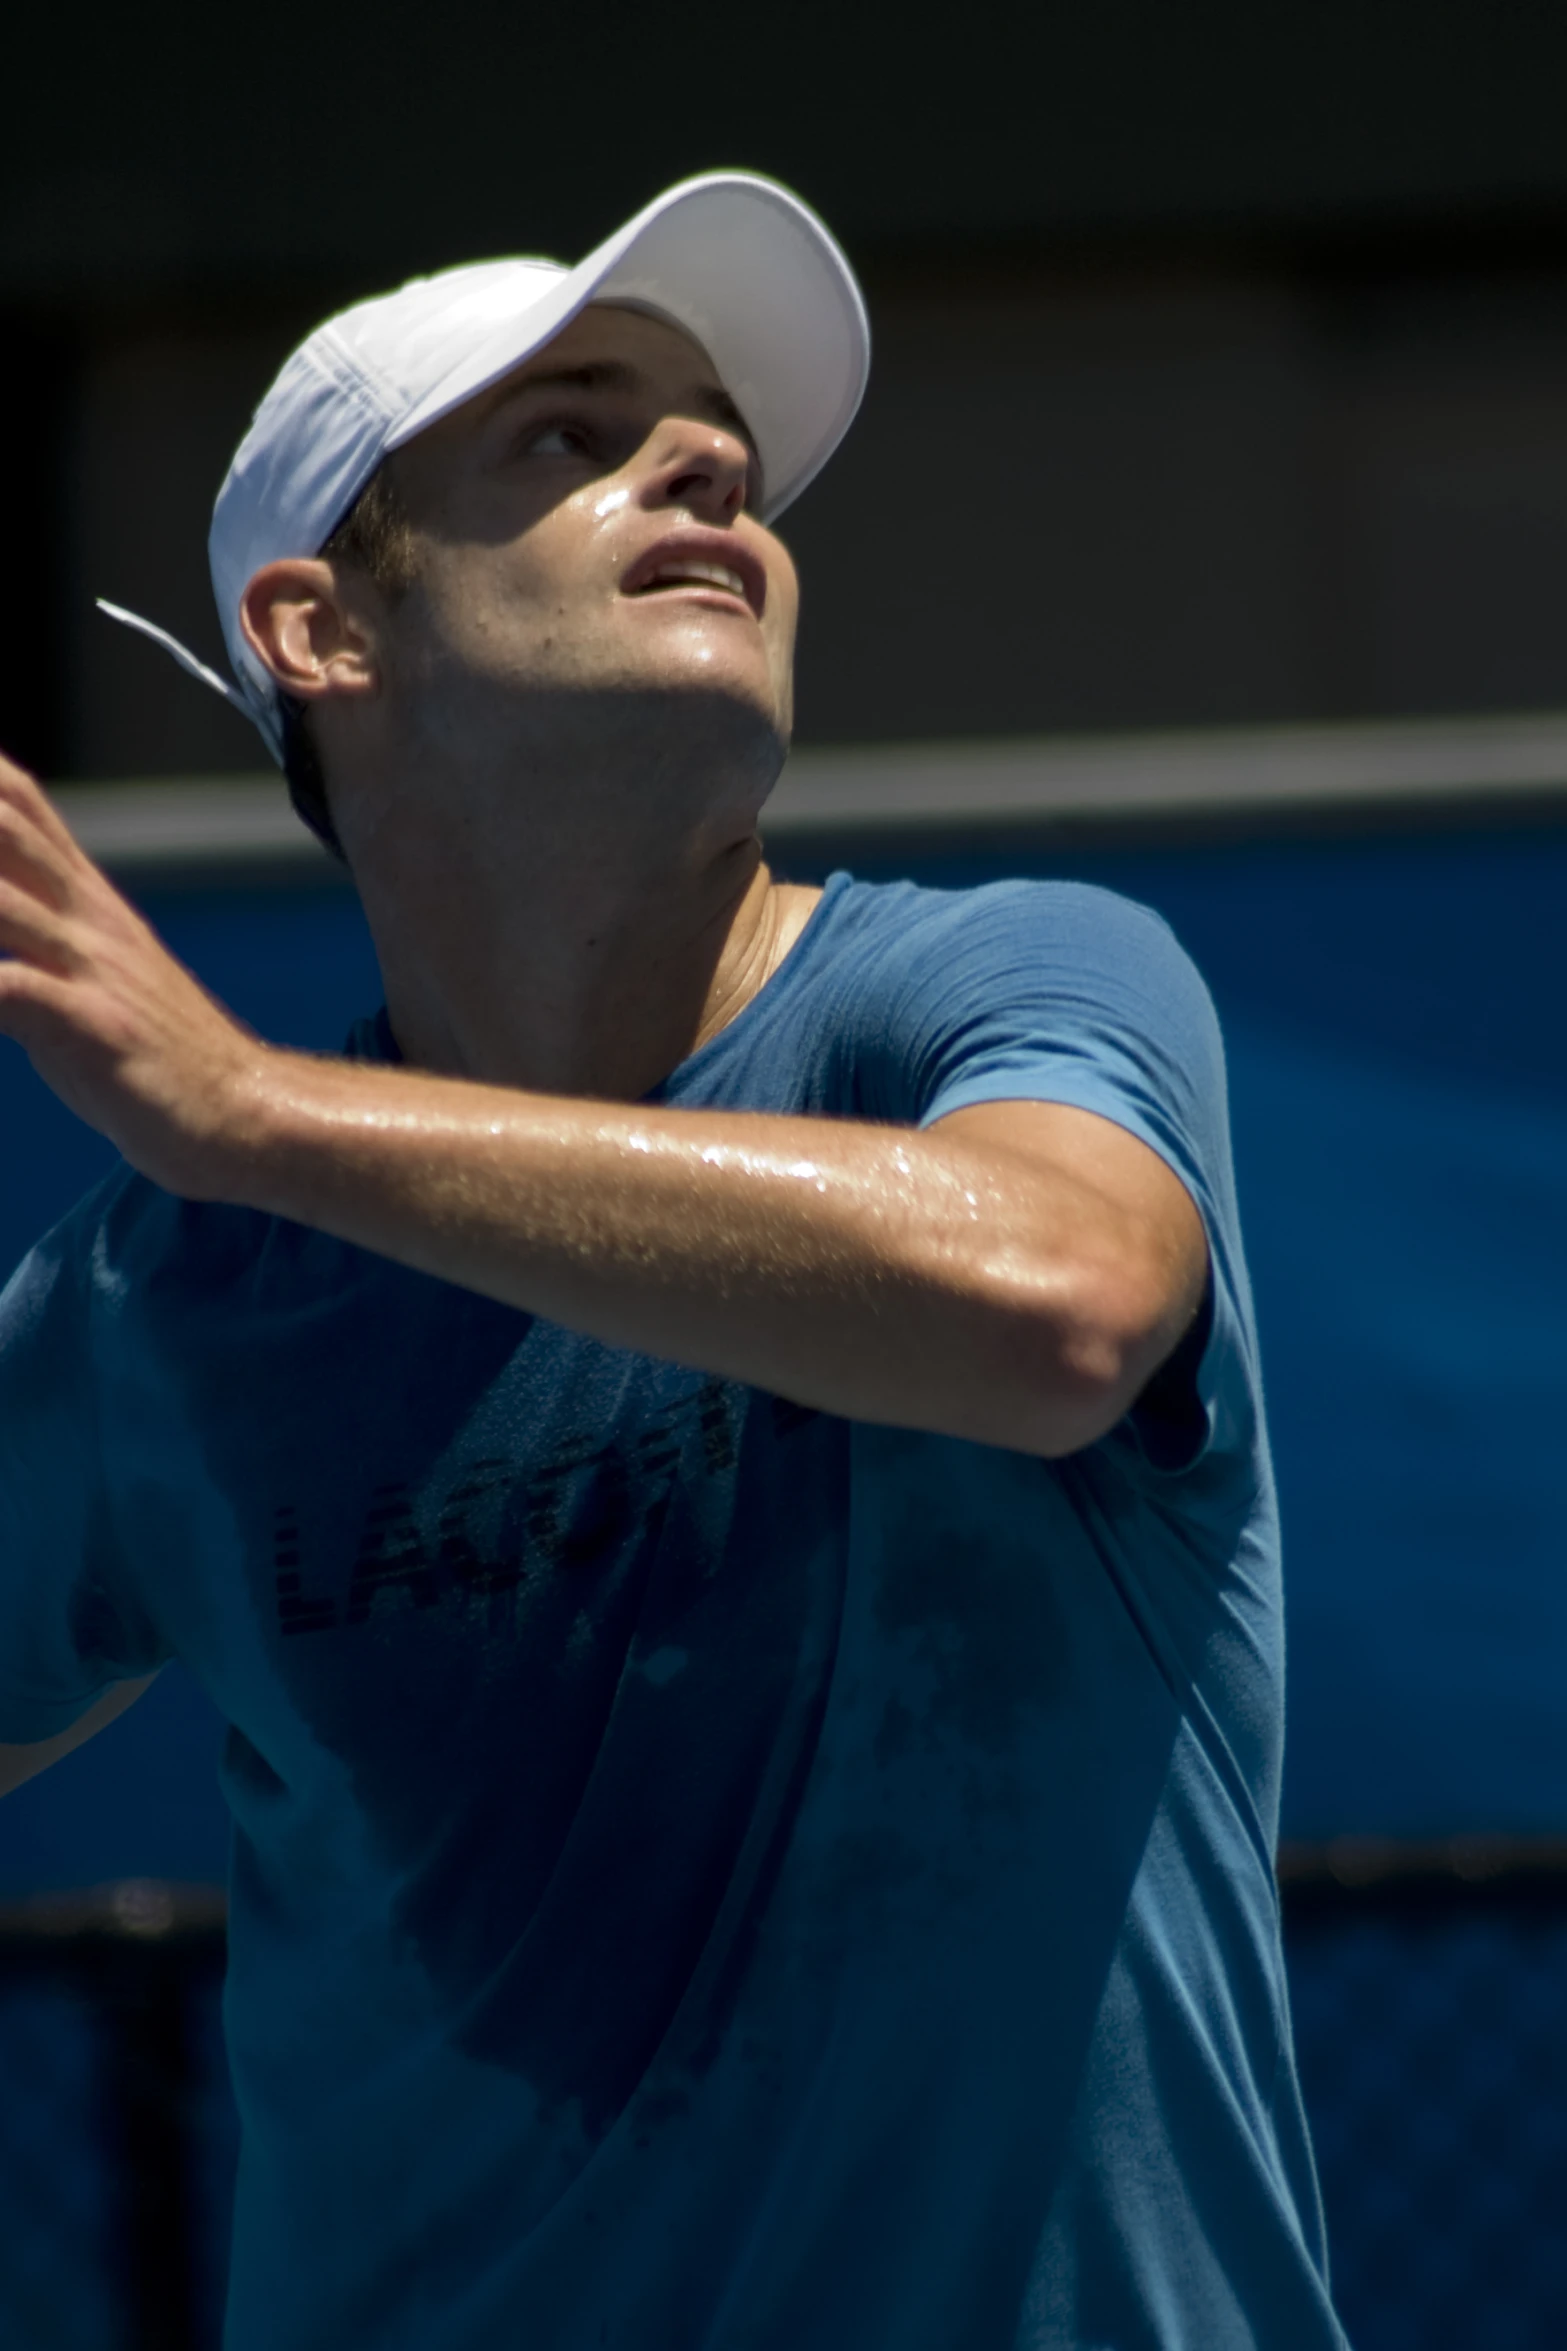 a man getting ready to hit the tennis ball with his racket